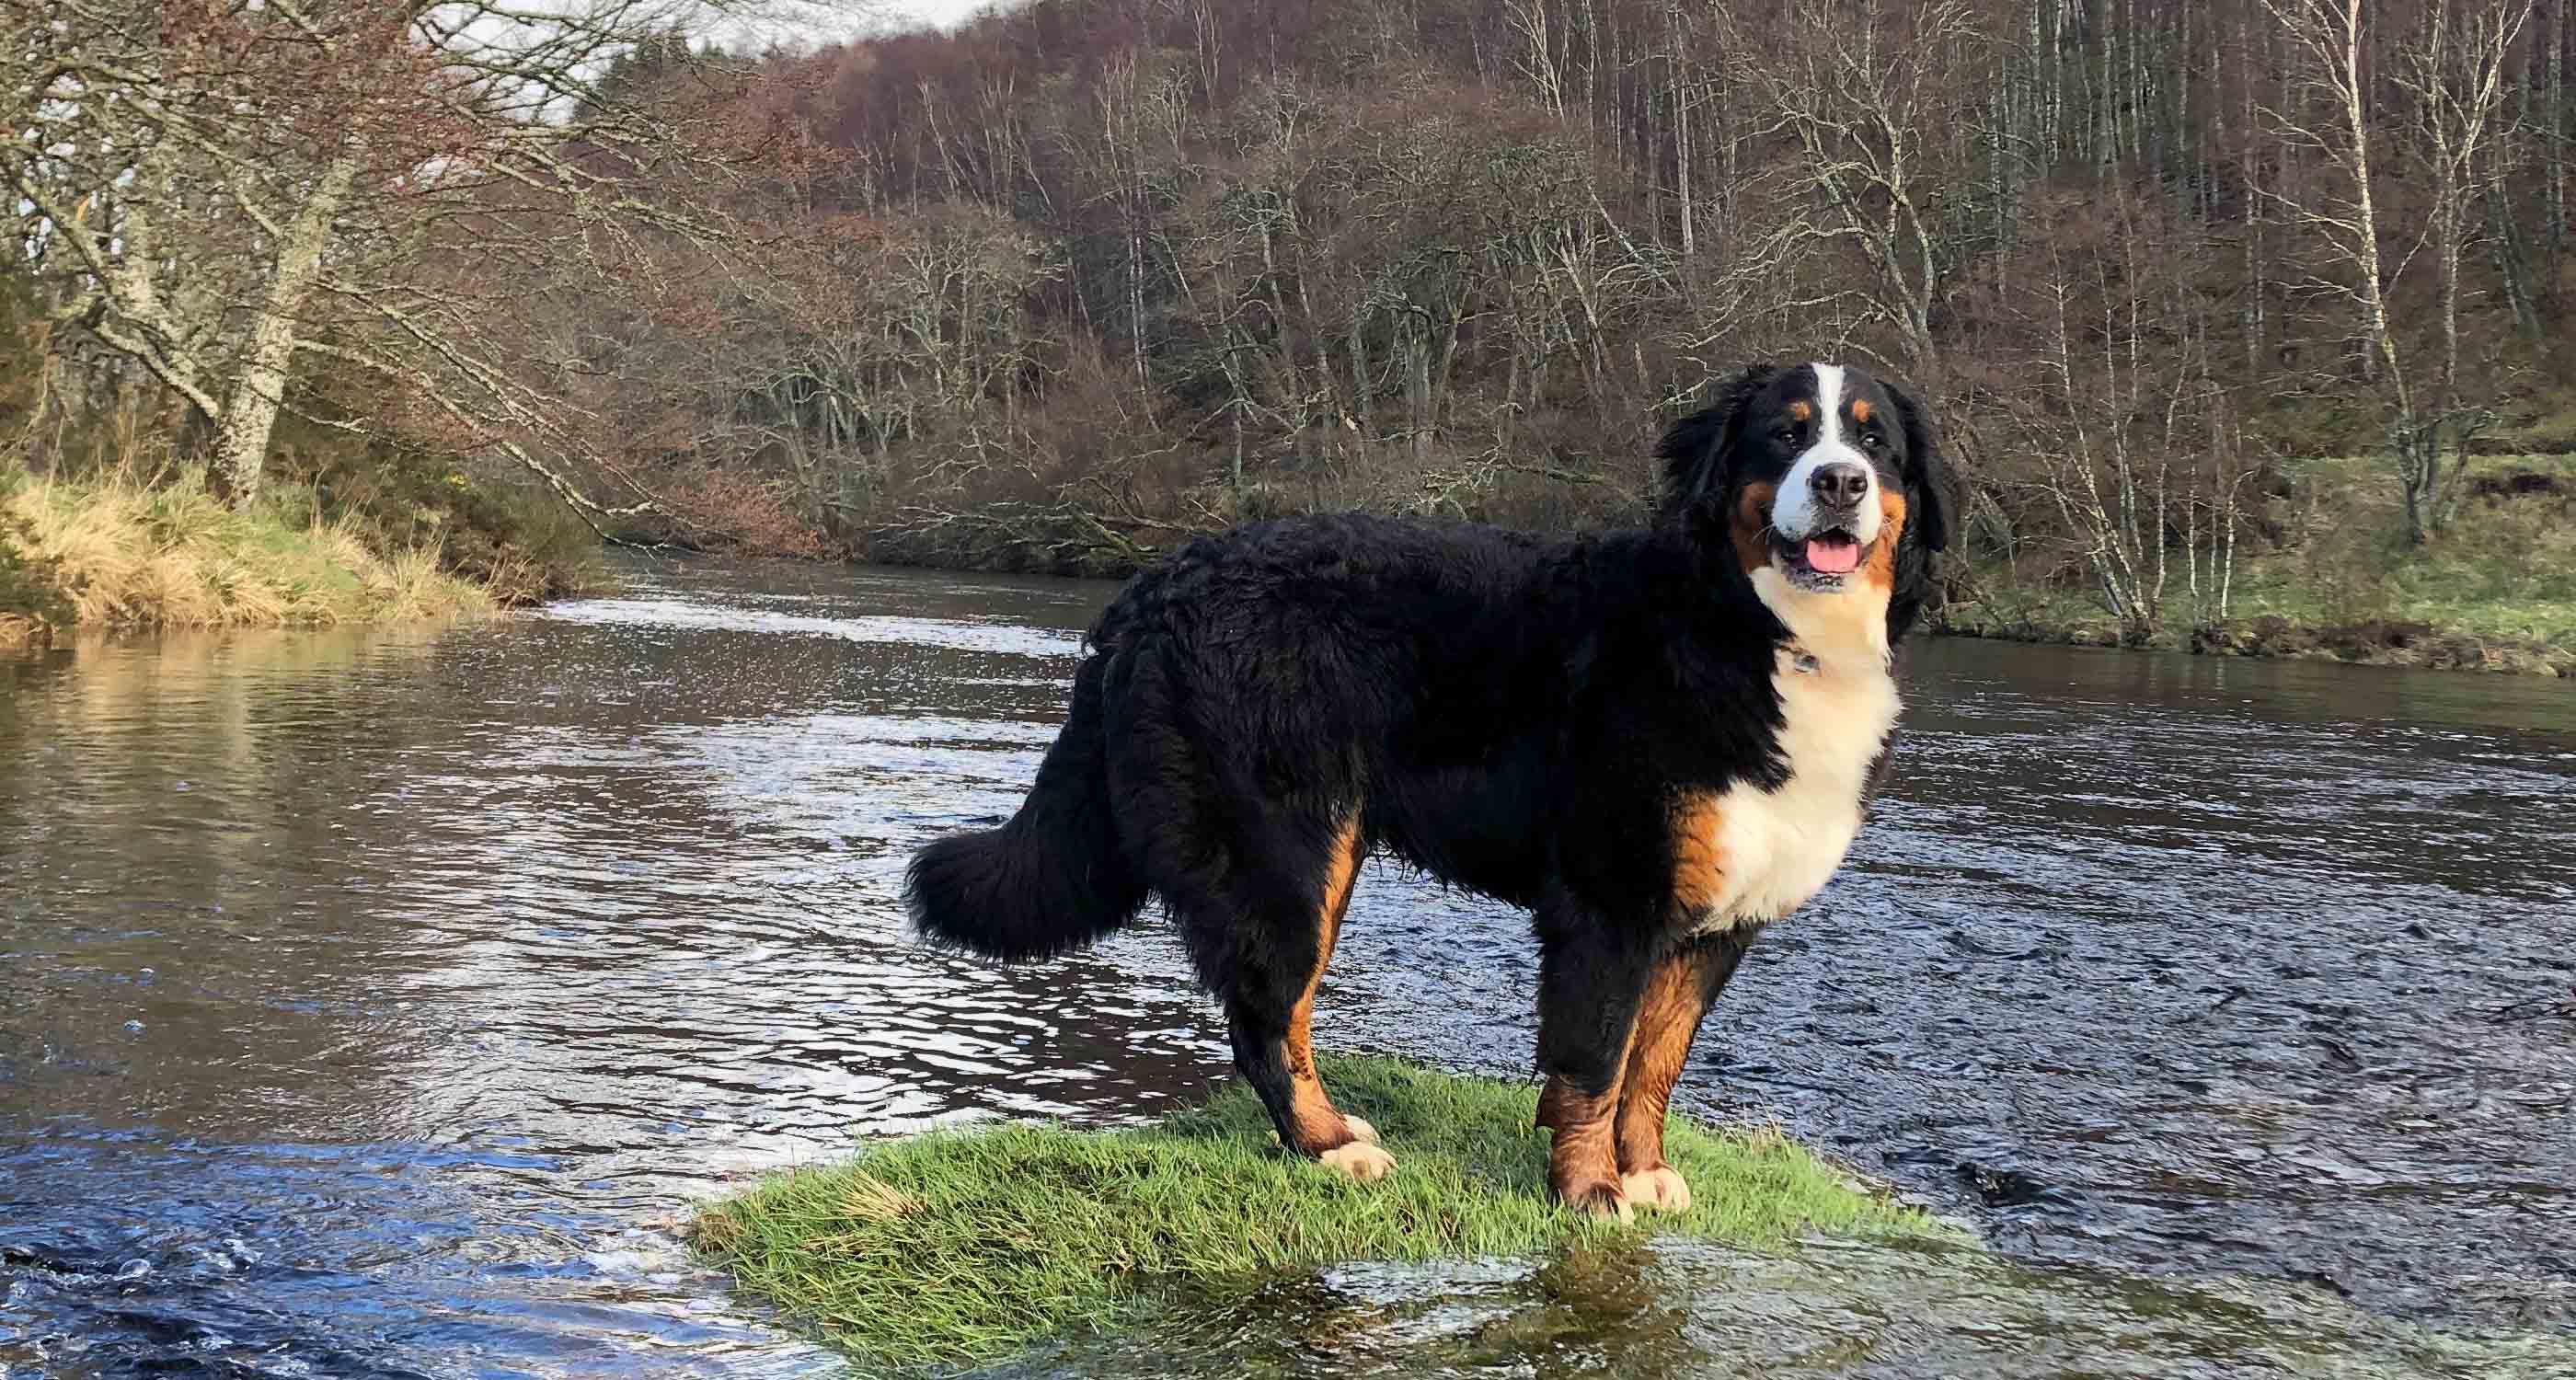 Dog on a river